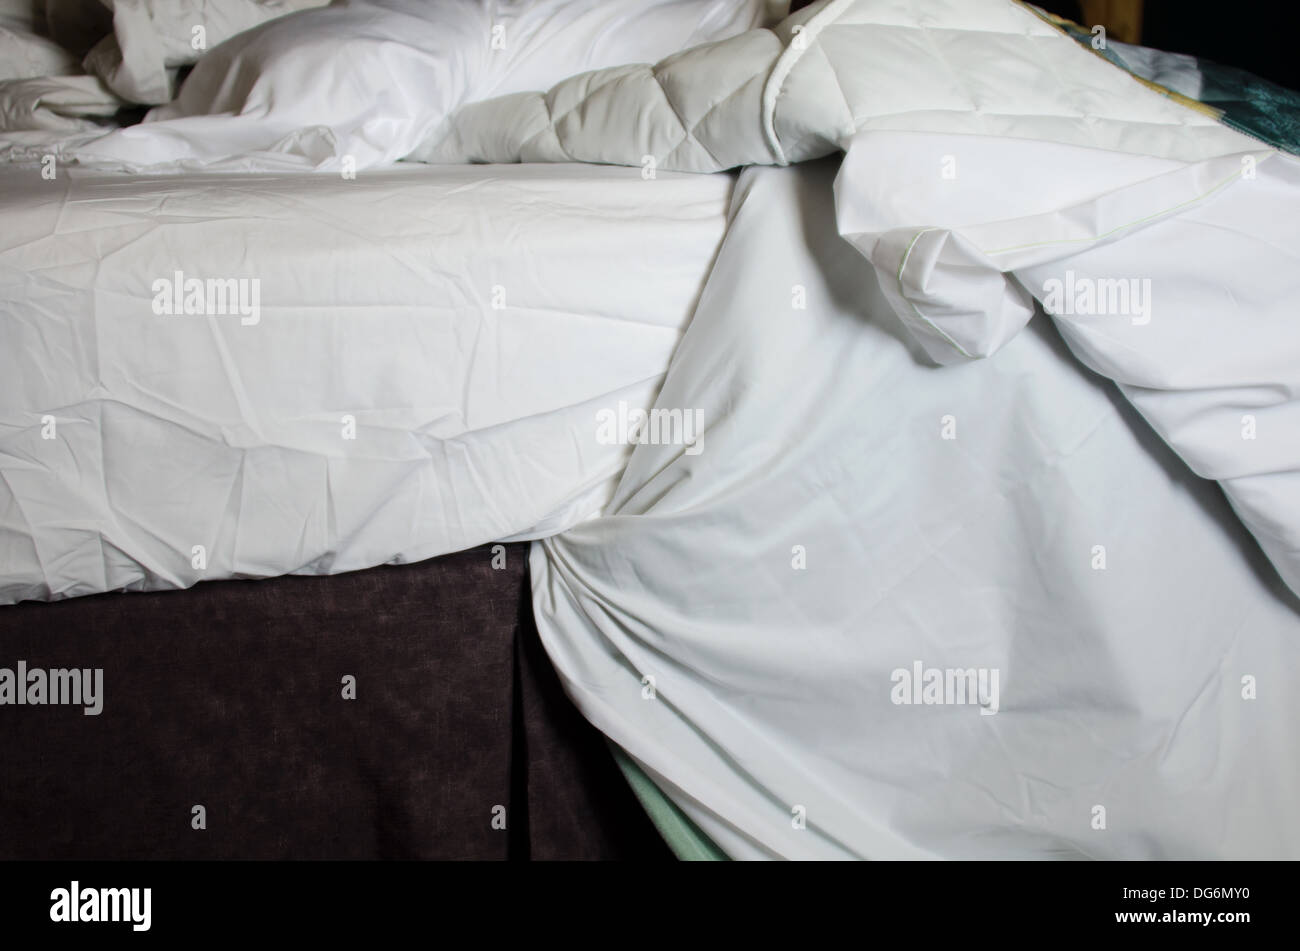 Morning light on rumpled sheets. Stock Photo